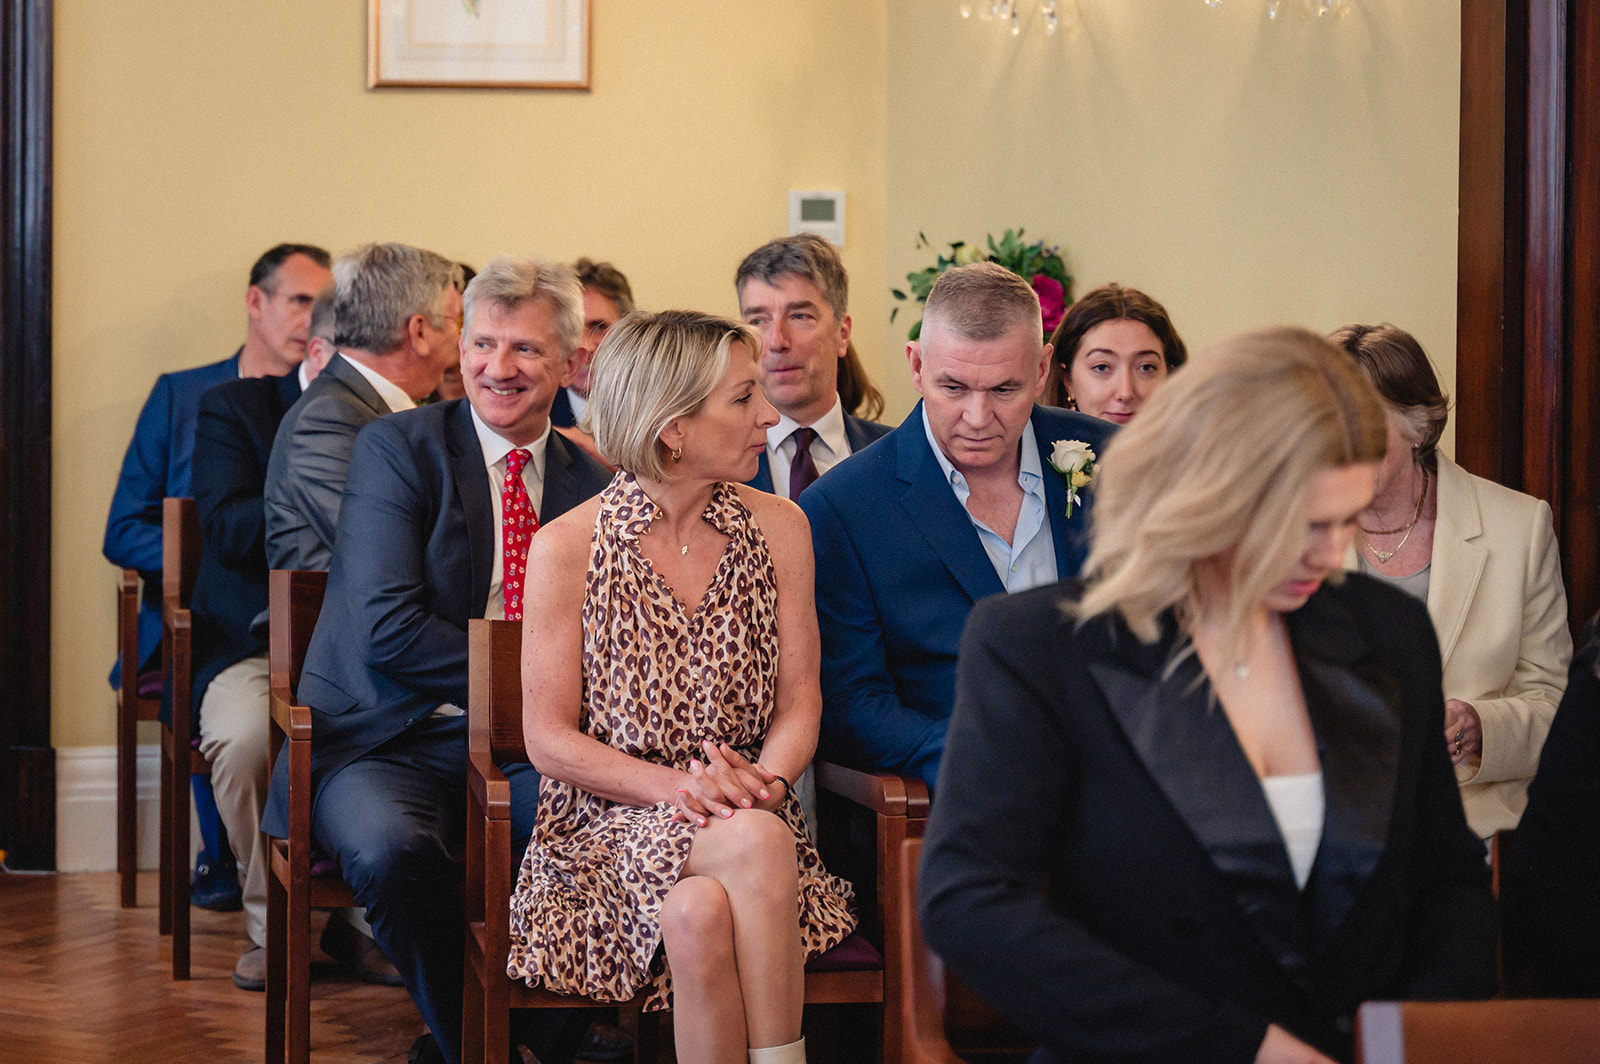 Guests waiting for the wedding ceremony in the Brydon Room at Chelsea Town Hall